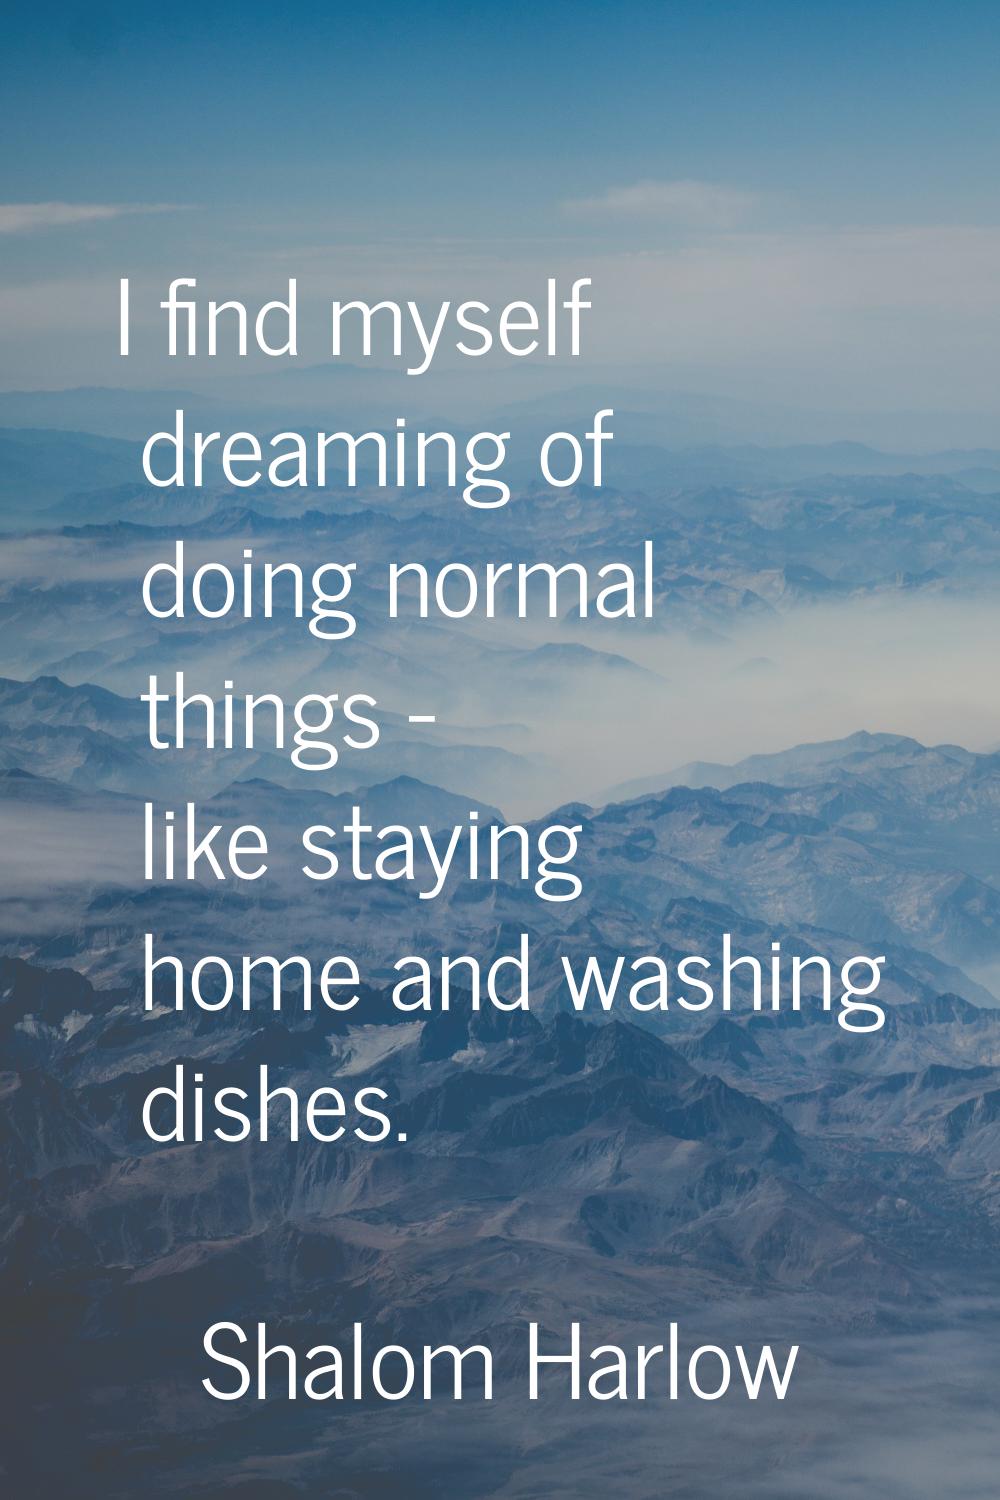 I find myself dreaming of doing normal things - like staying home and washing dishes.